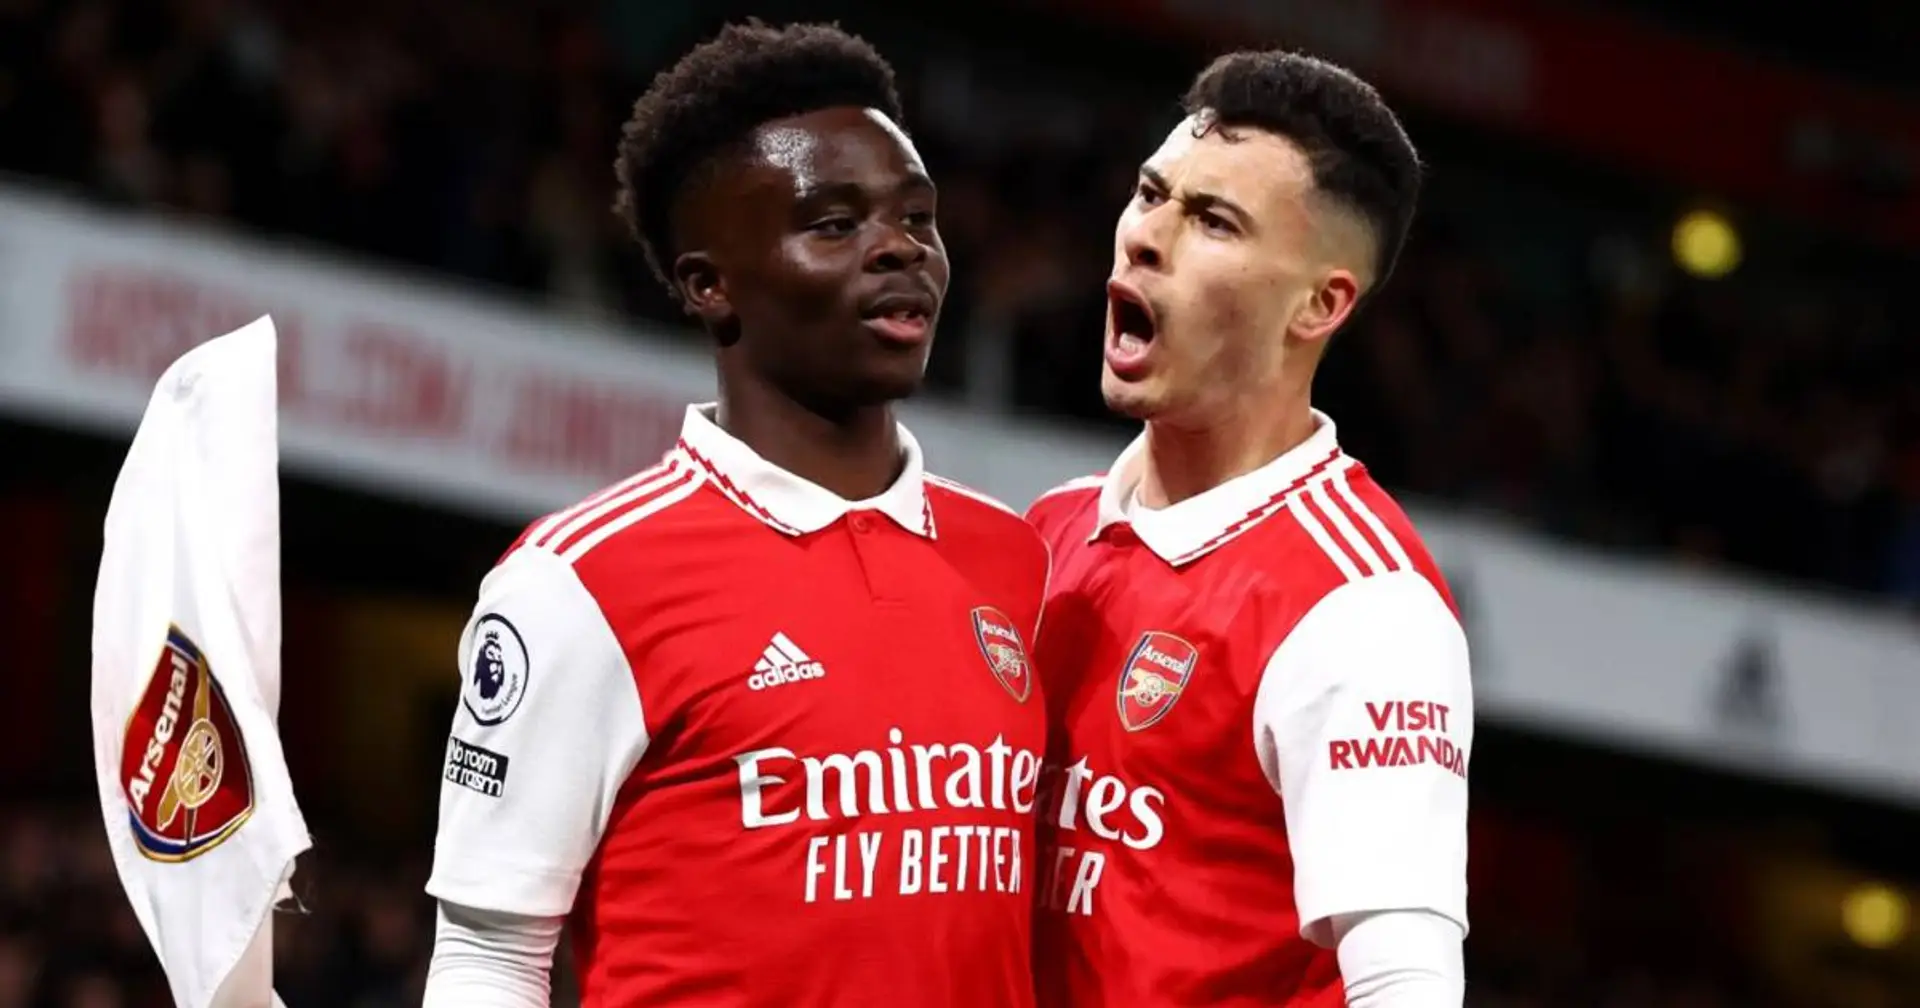 Martinelli missing from Arsenal squad to face Brentford, Saka included